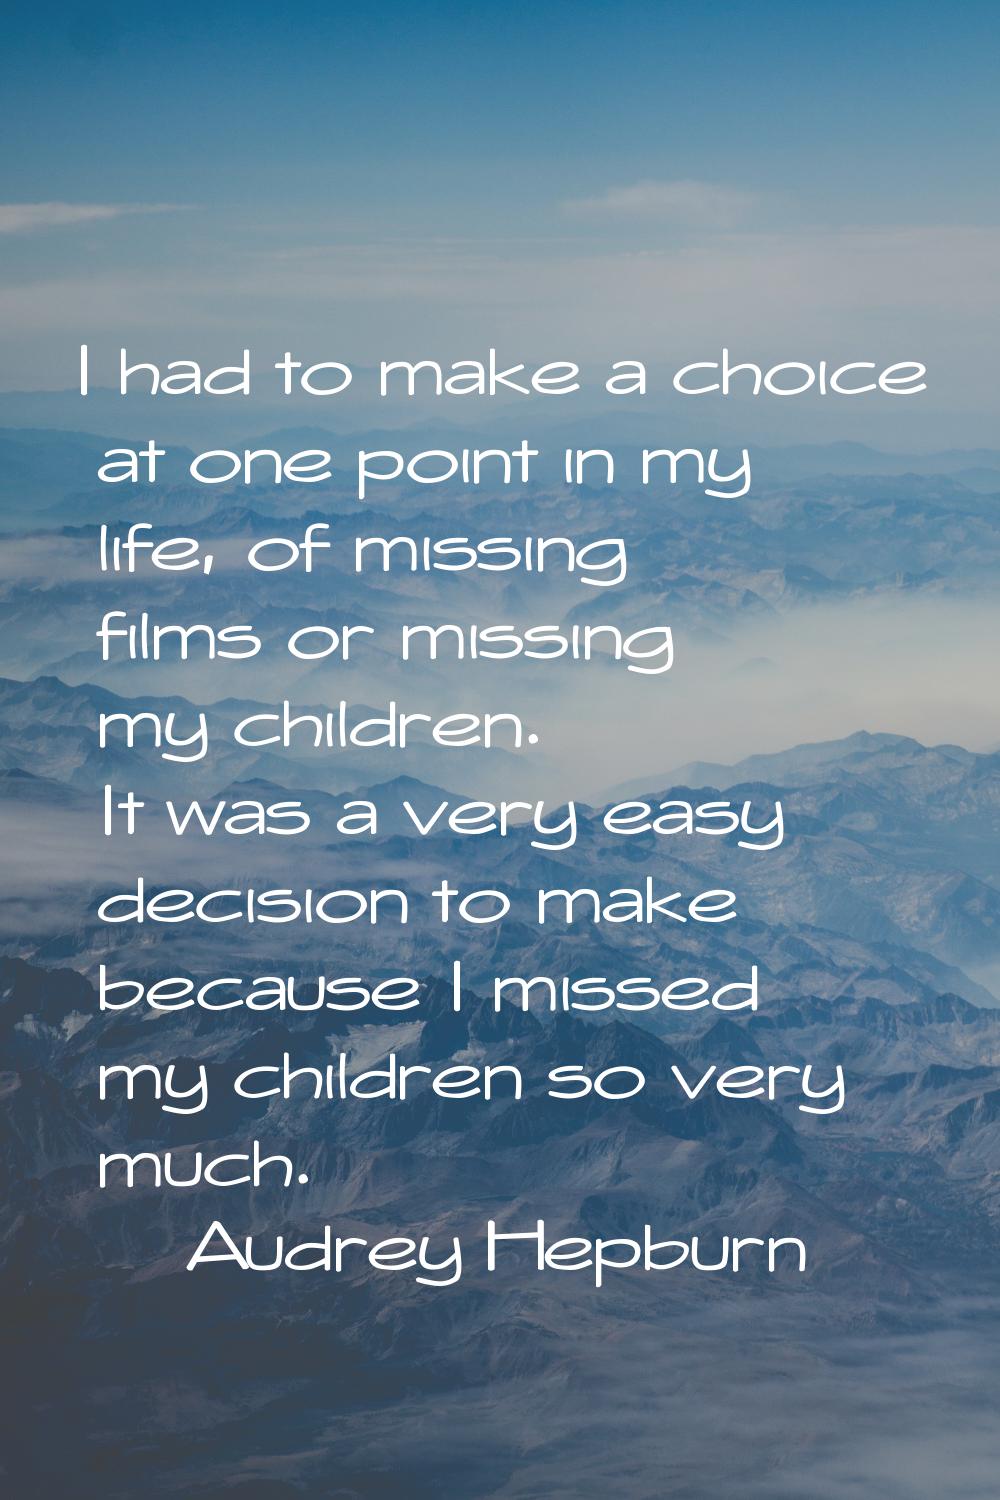 I had to make a choice at one point in my life, of missing films or missing my children. It was a v